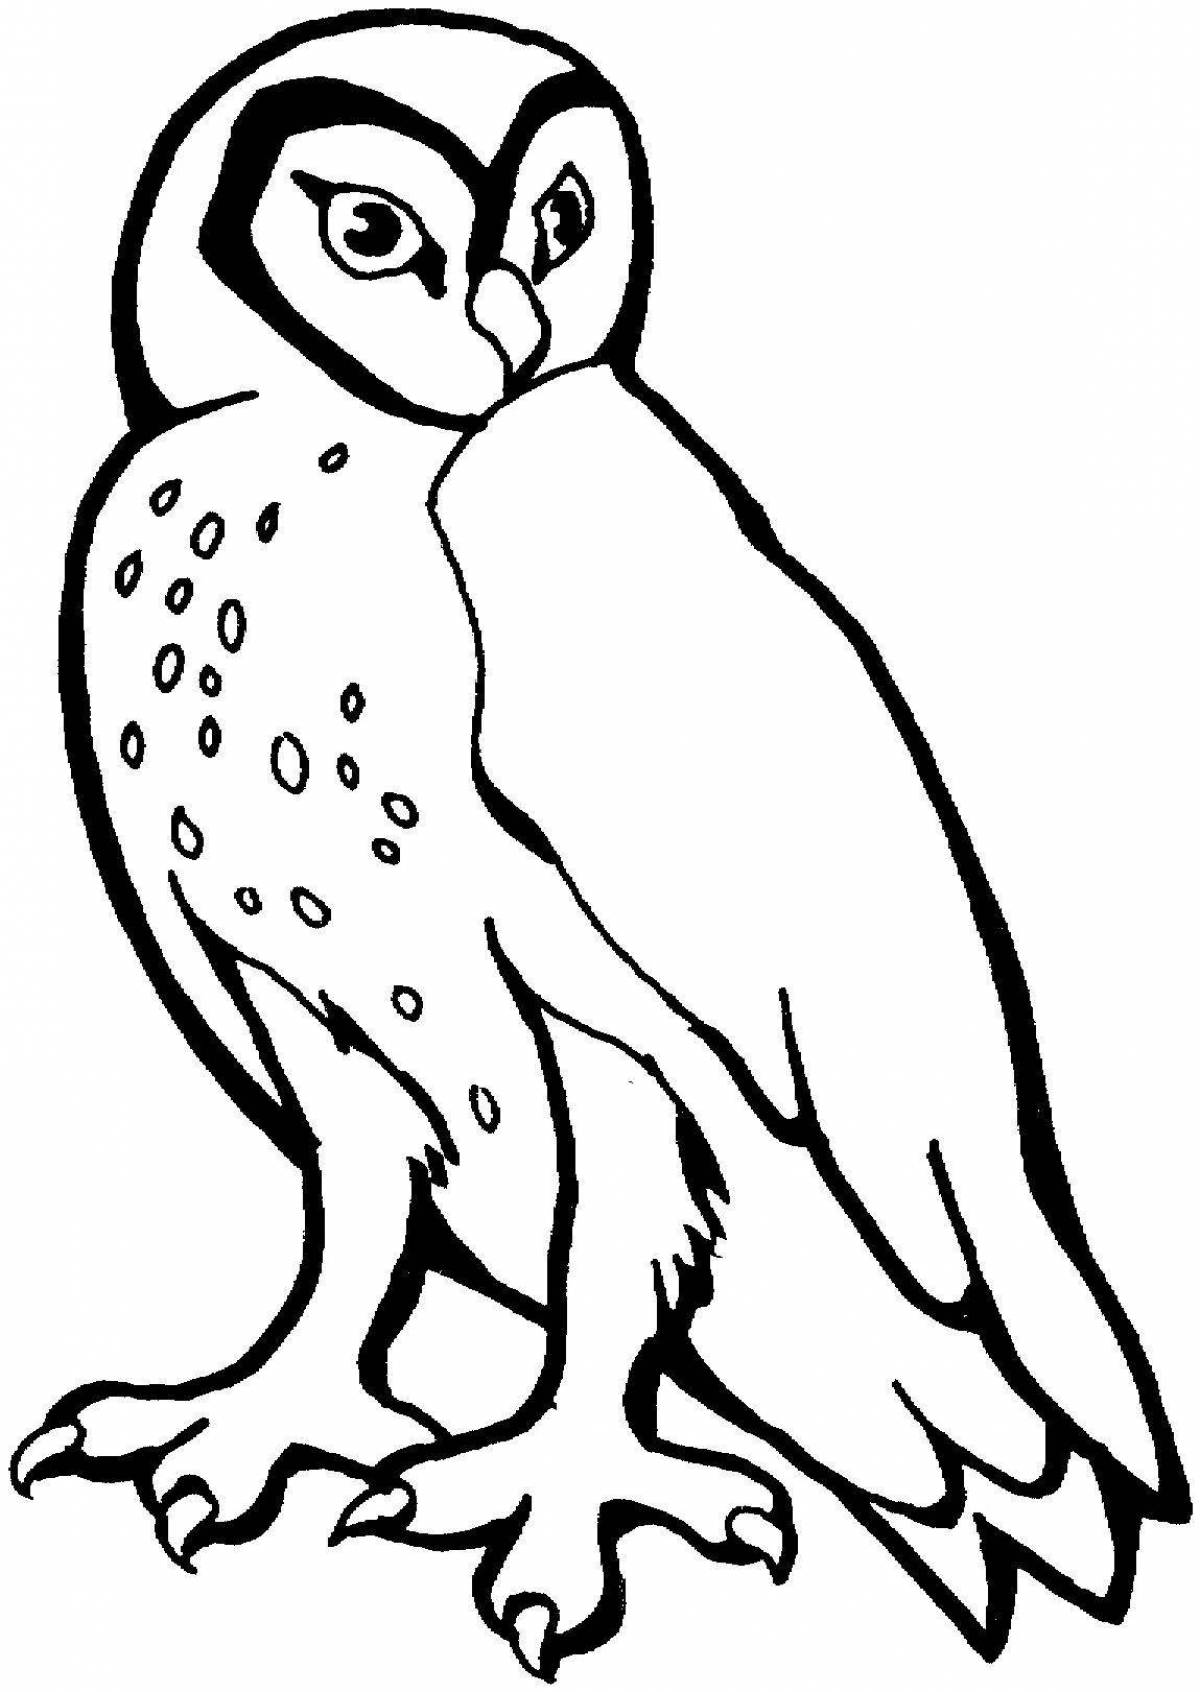 Playful snowy owl coloring page for babies